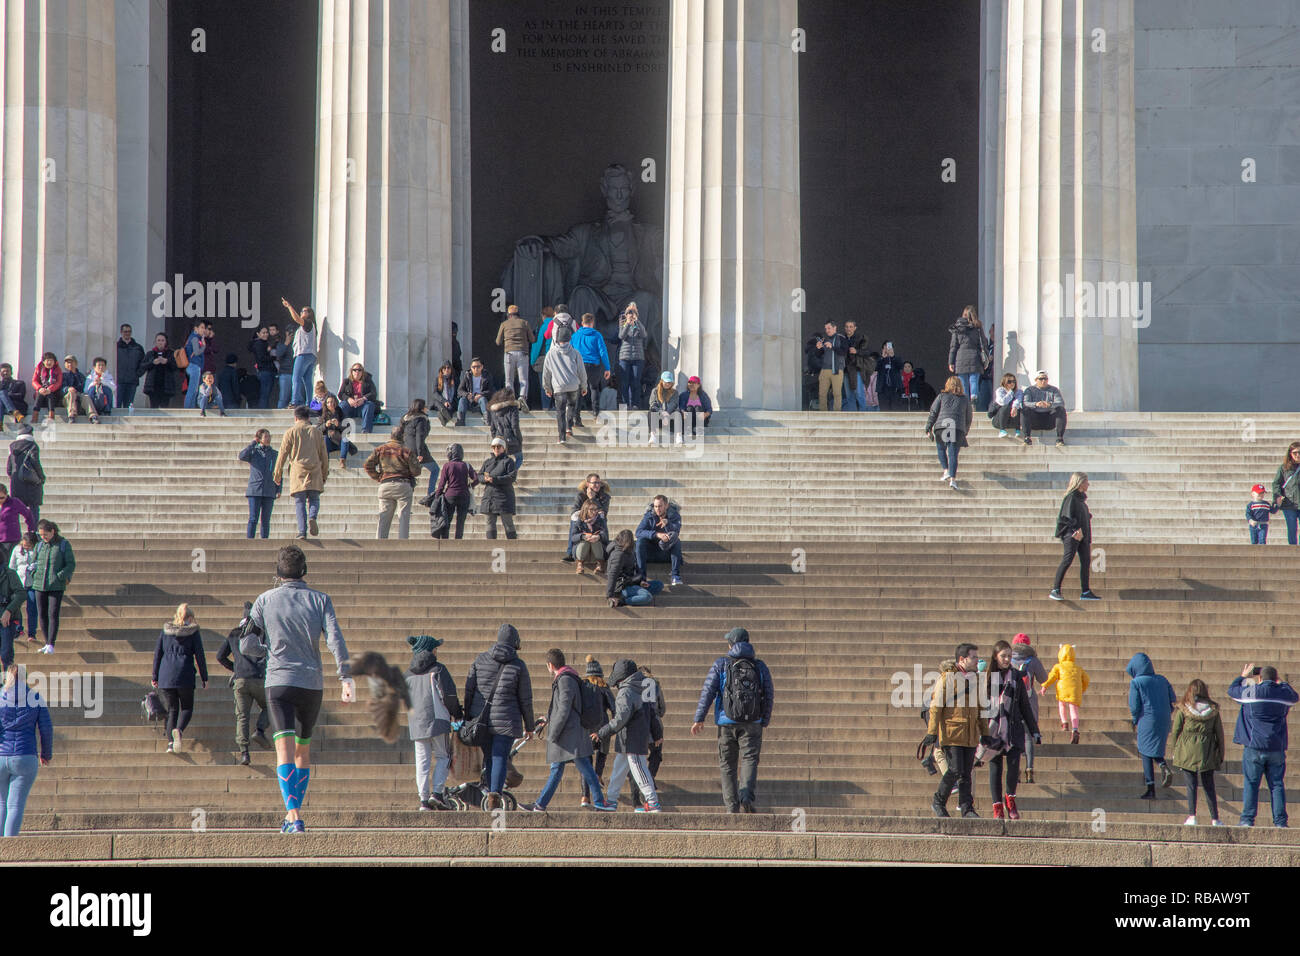 Lincoln Memorial is crowded with visitors during the government shutdown. Monuments on the National Mall in Washington, DC, are partially closed due t Stock Photo